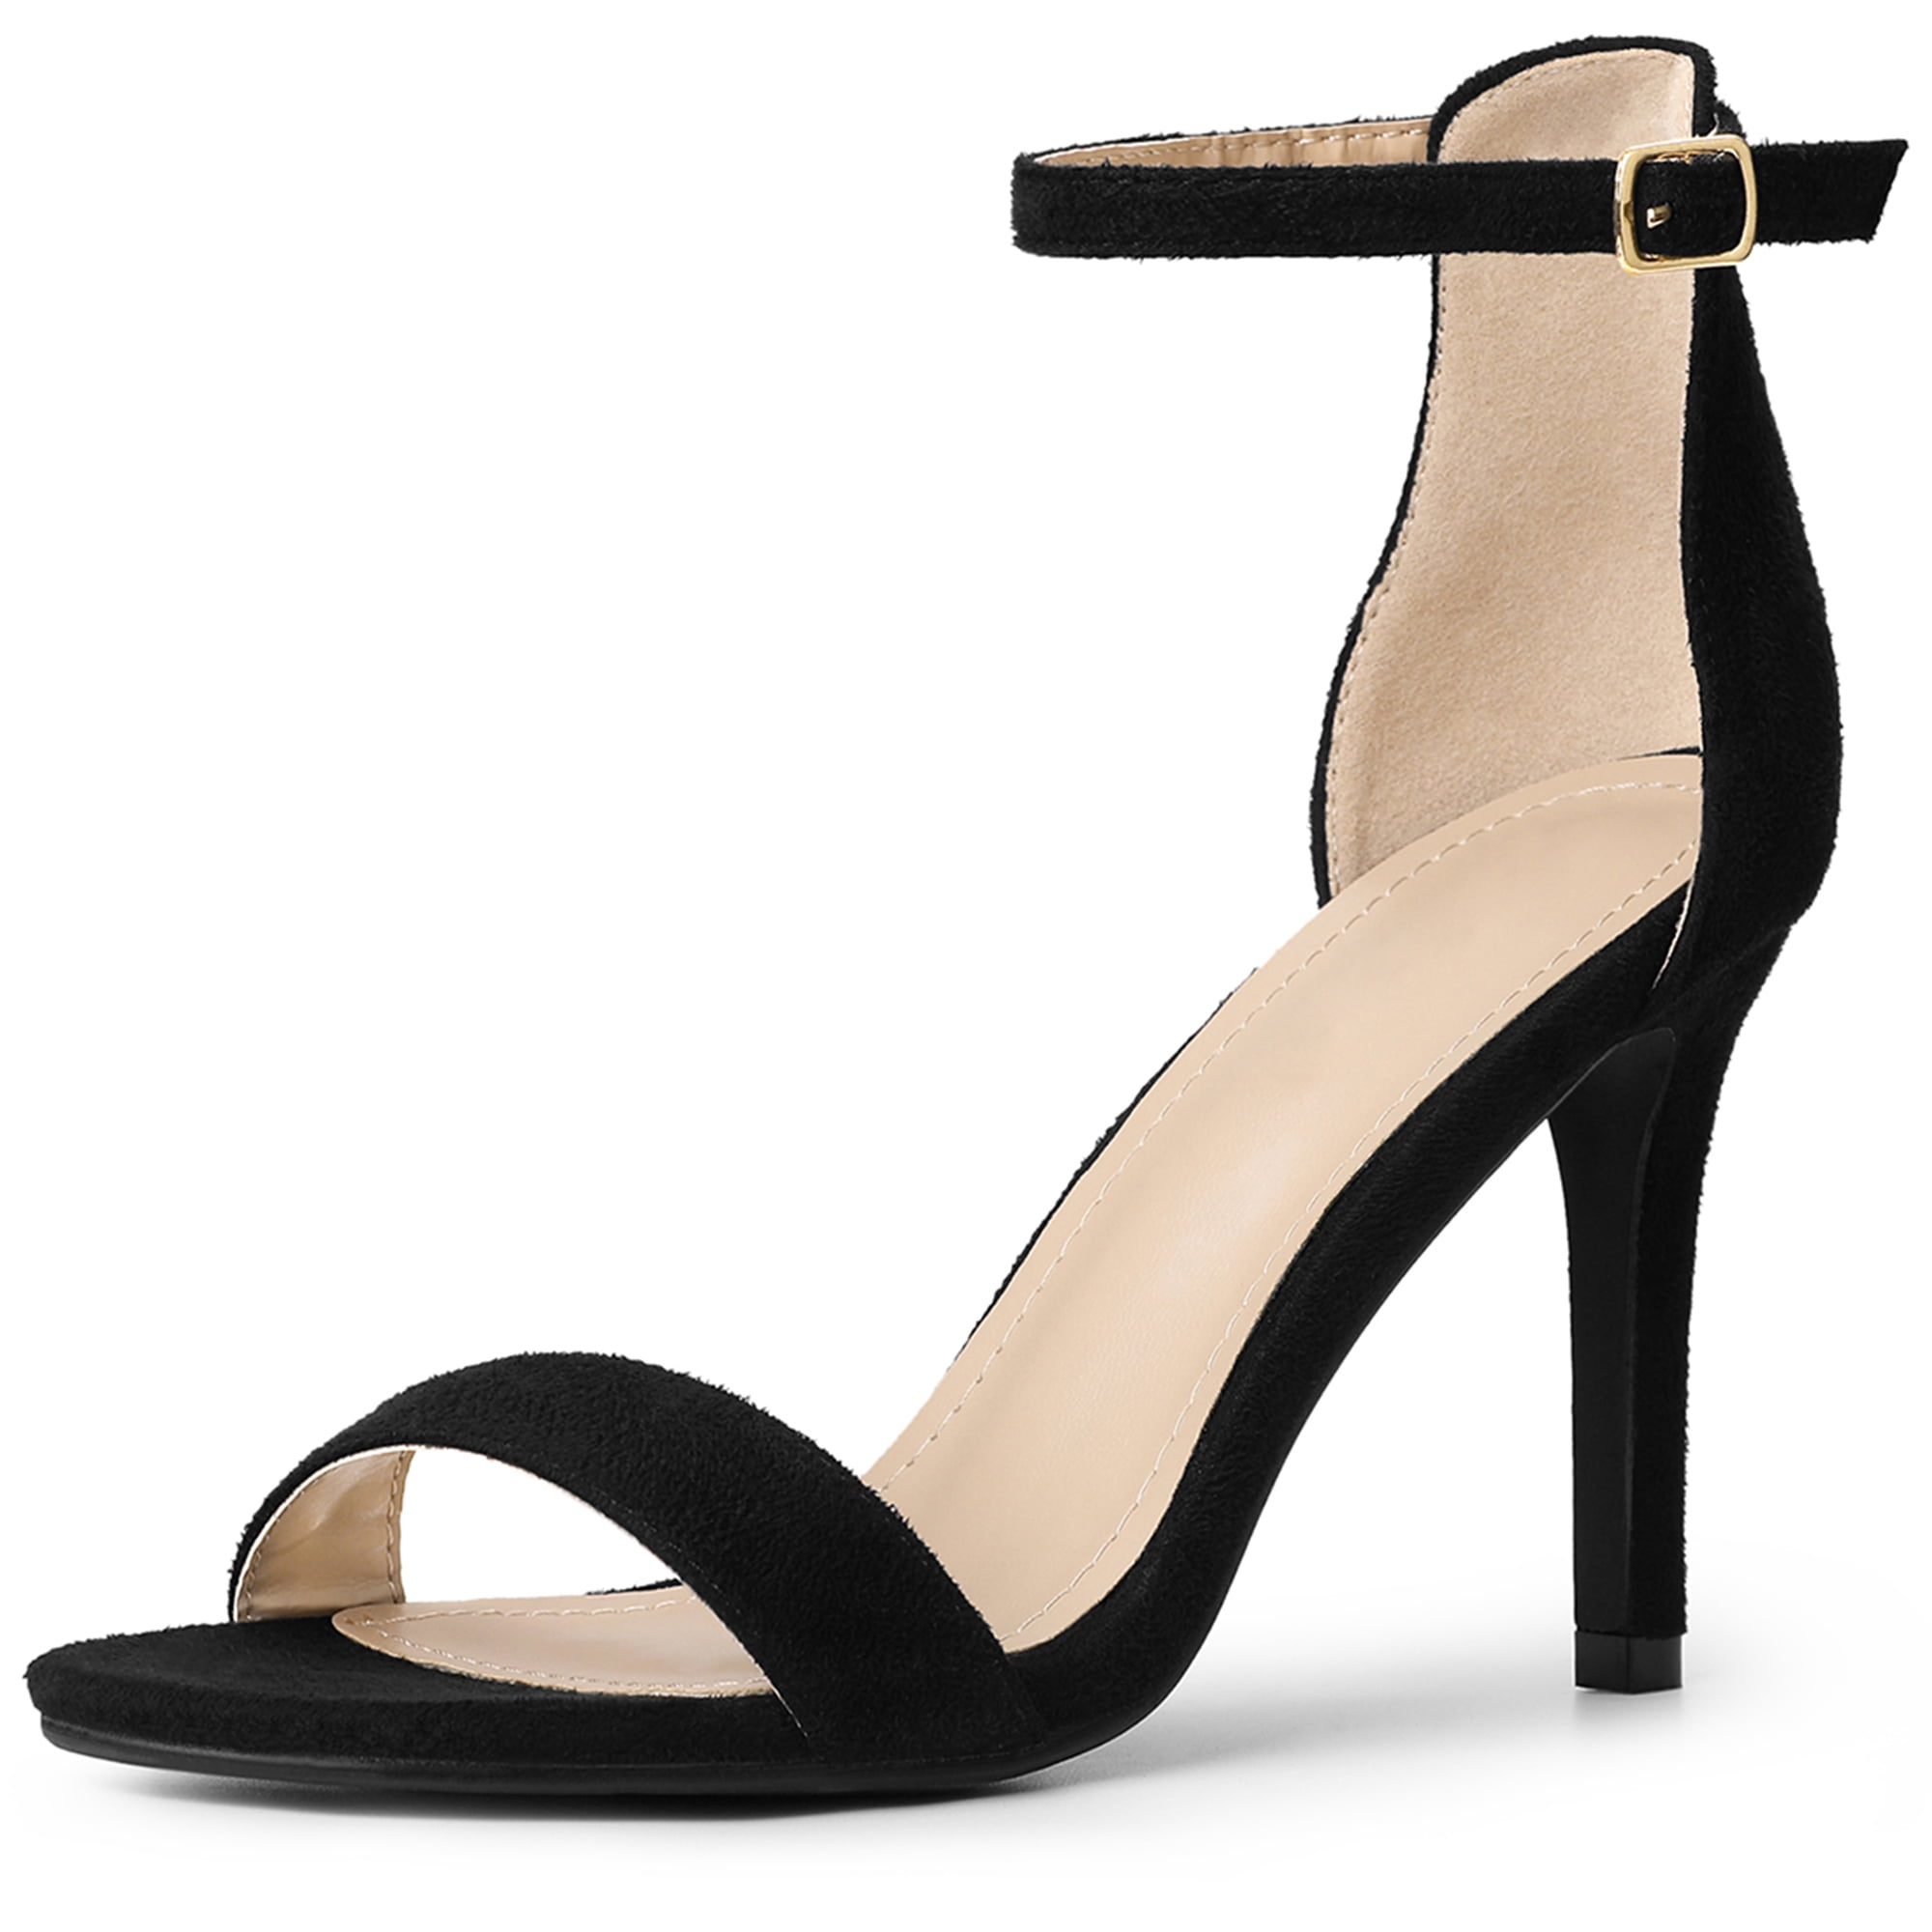 Ariana Lace Up Heel (Olive) | Heels, Fashion shoes, High heel sandals